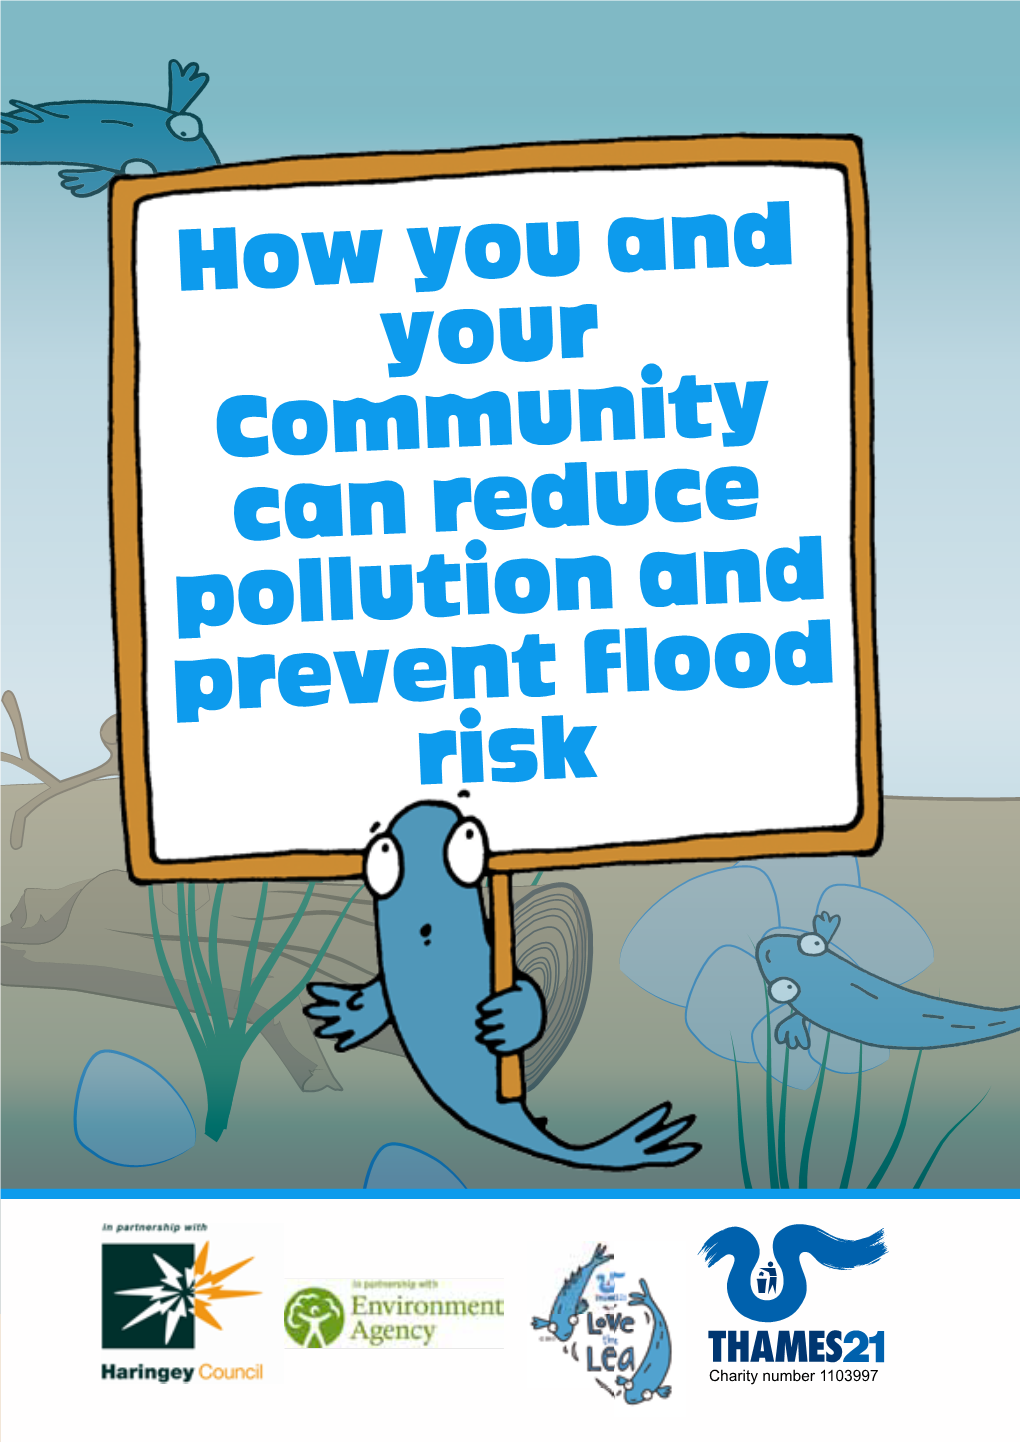 How You and Your Community Can Reduce Pollution and Prevent Flood Risk